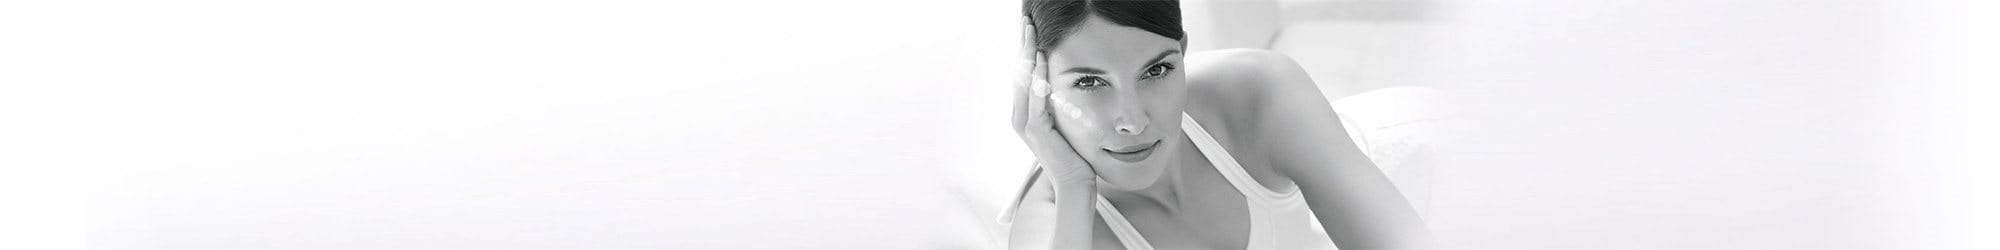 Eucerin Sun Protection article banner